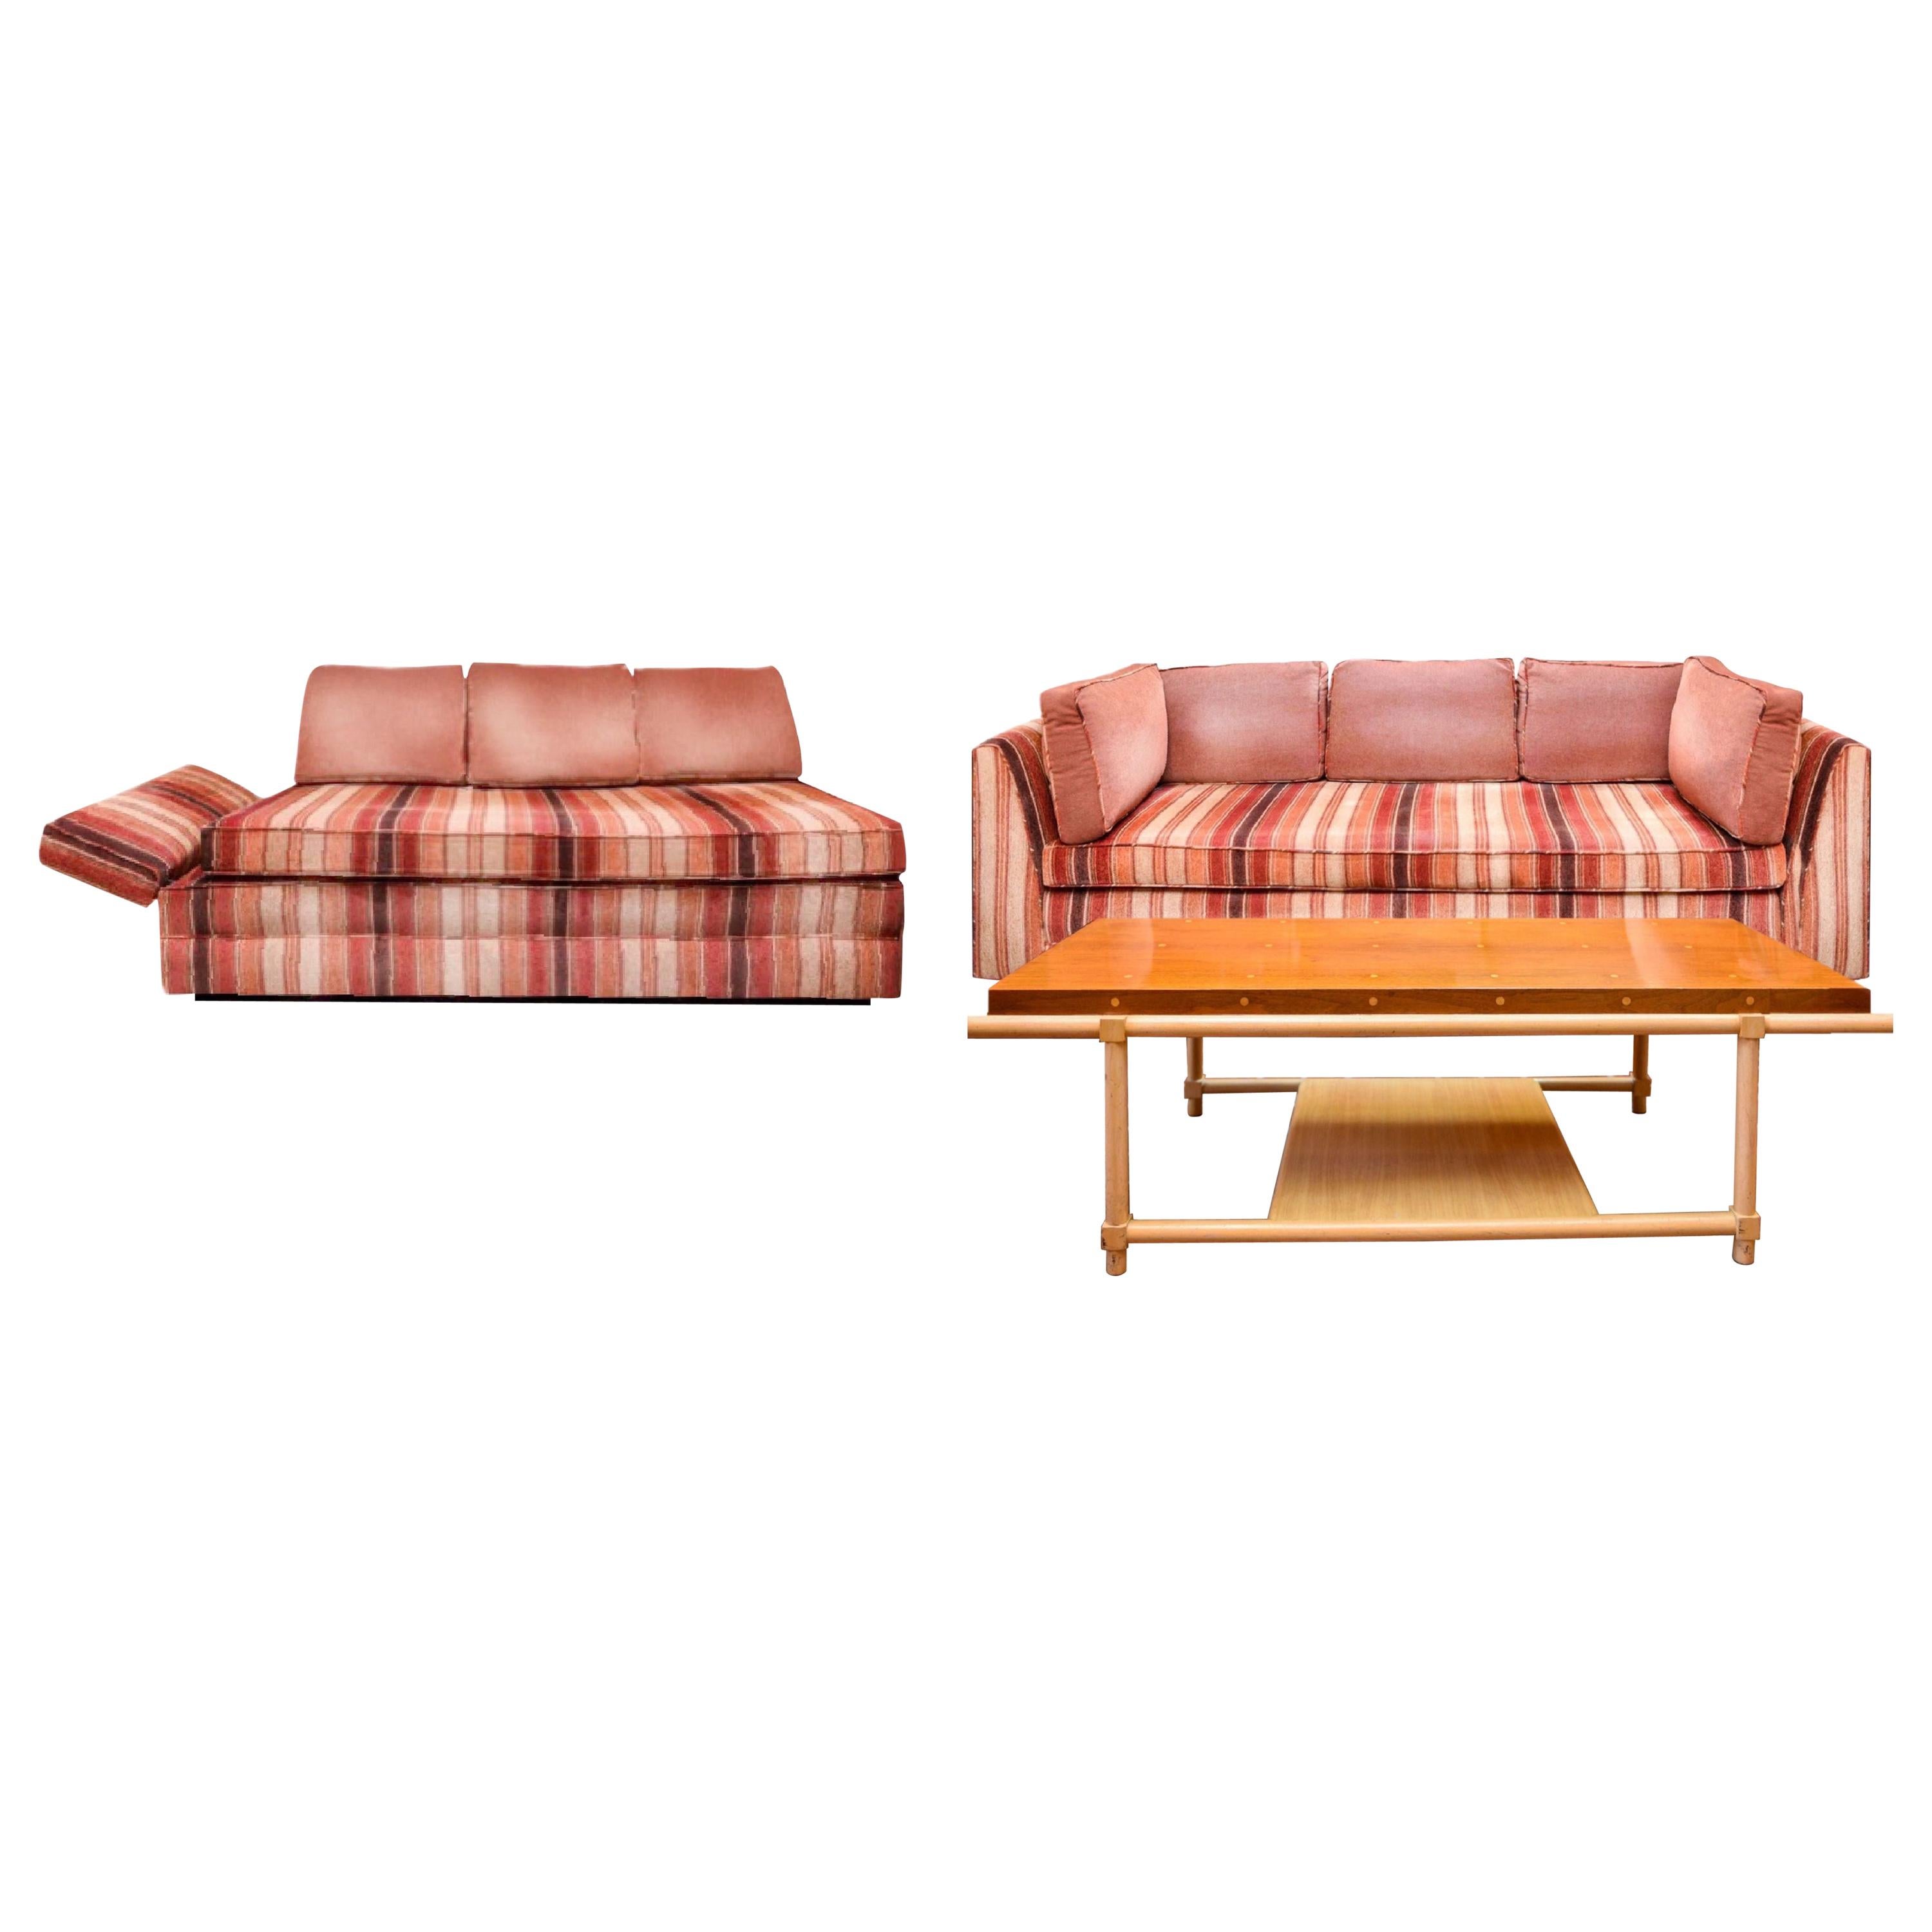 Parzinger Originals Plinth Sofa, Daybed Loveseat & Coffee Table Living Set, 1959